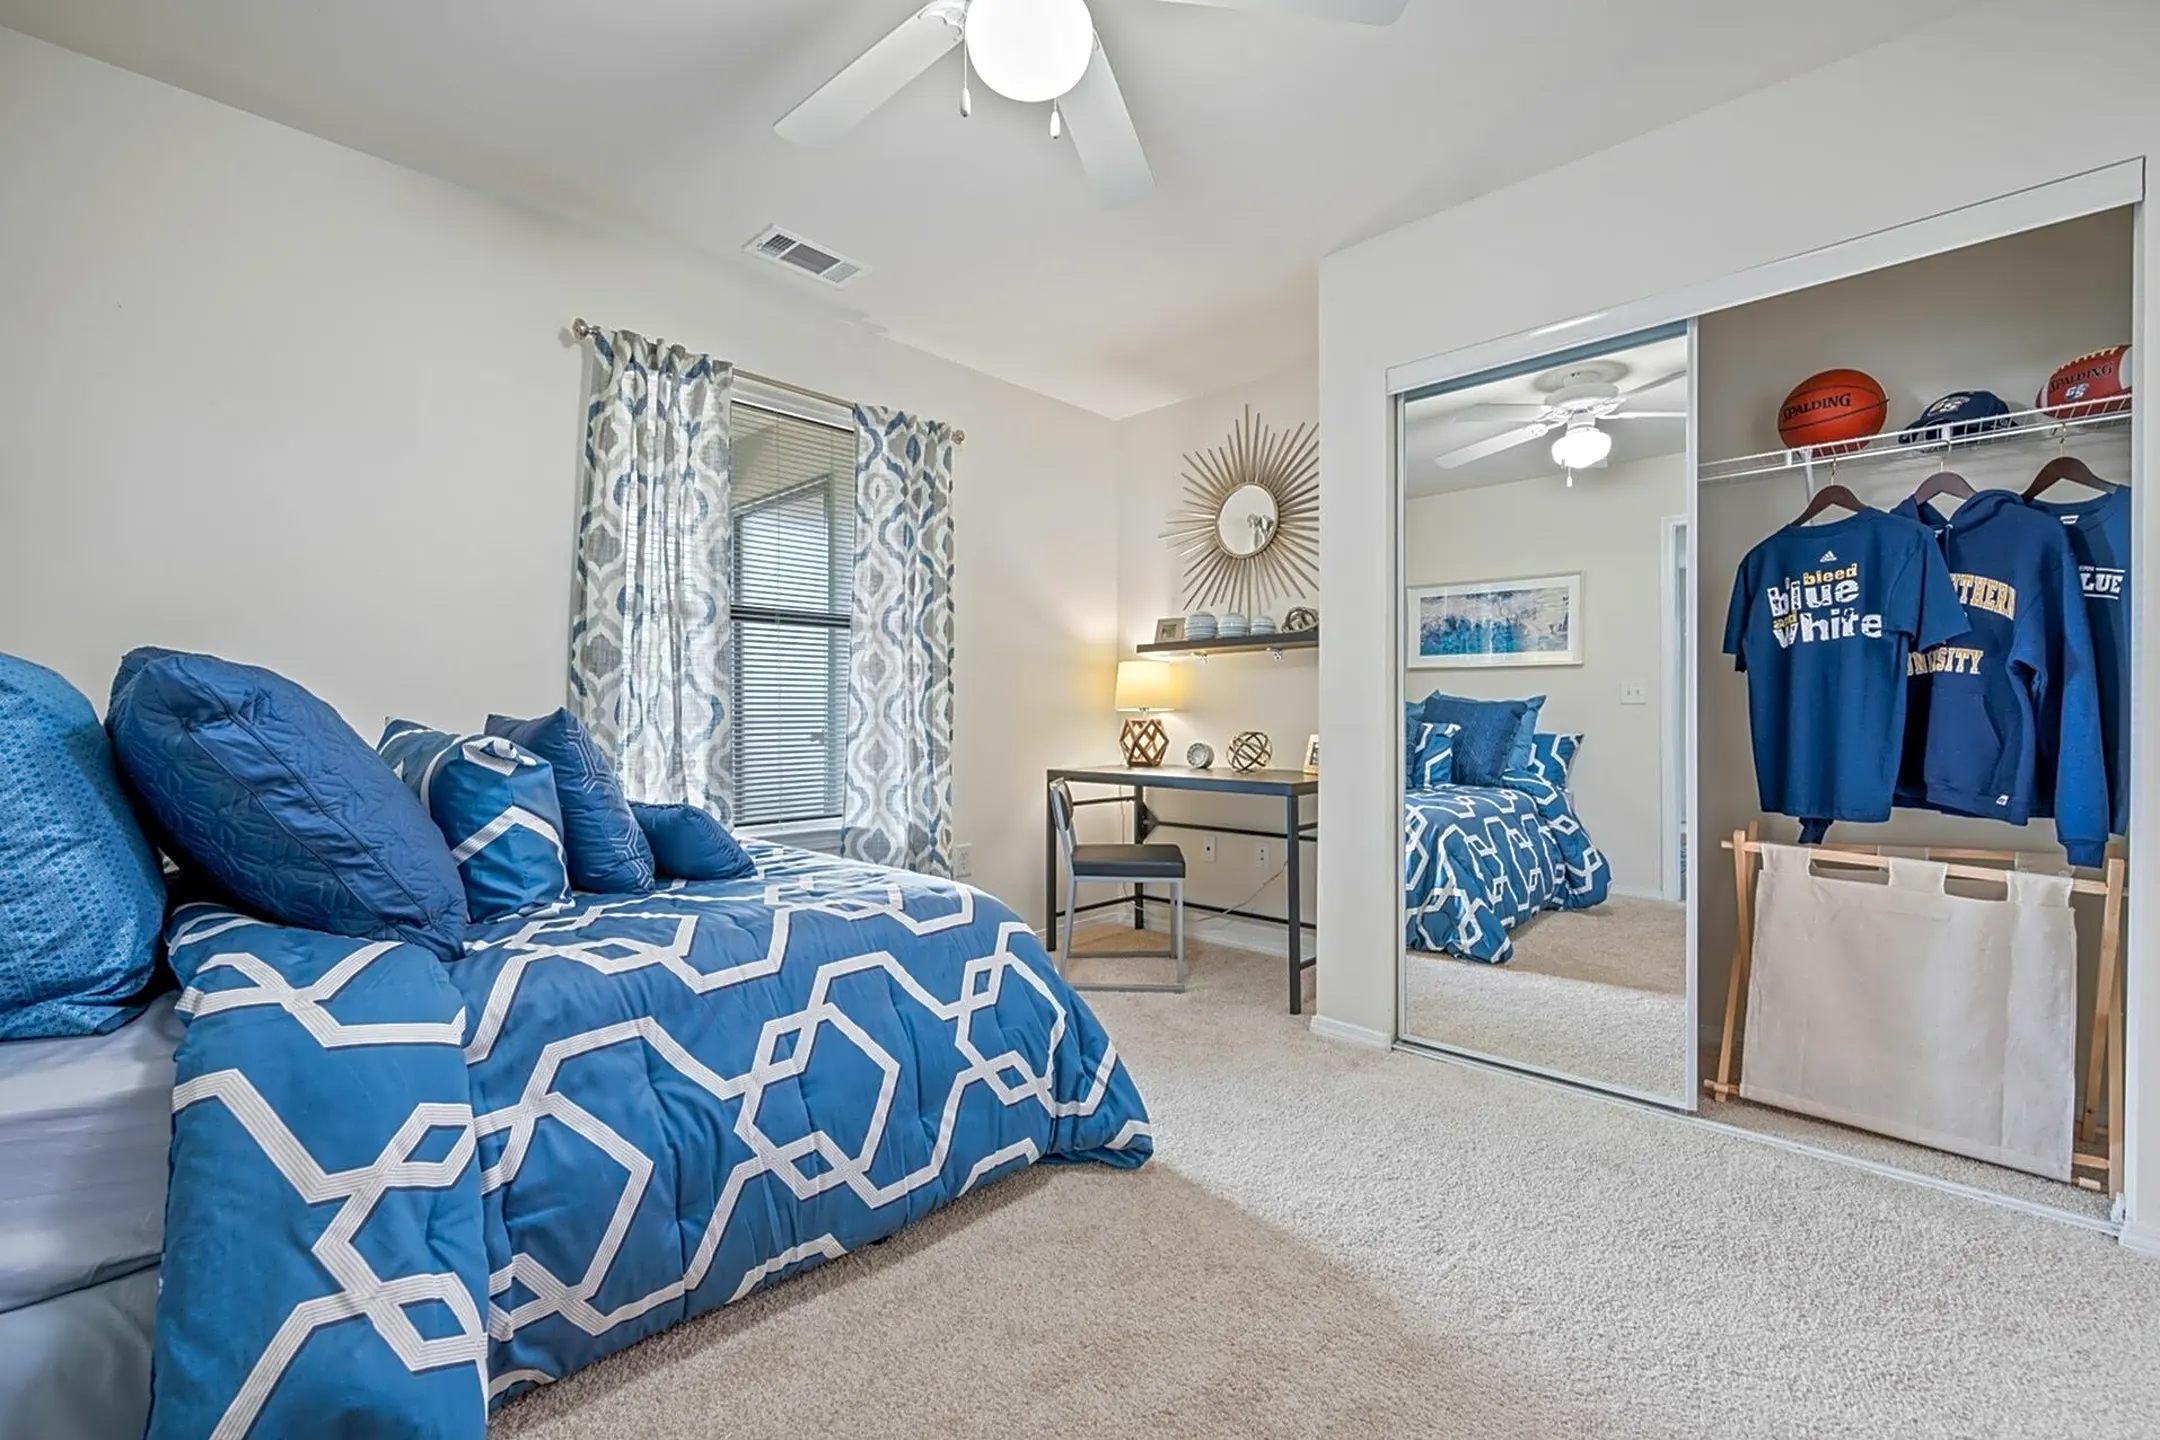 Bedroom - The Connection - Per Bed Lease - Statesboro, GA